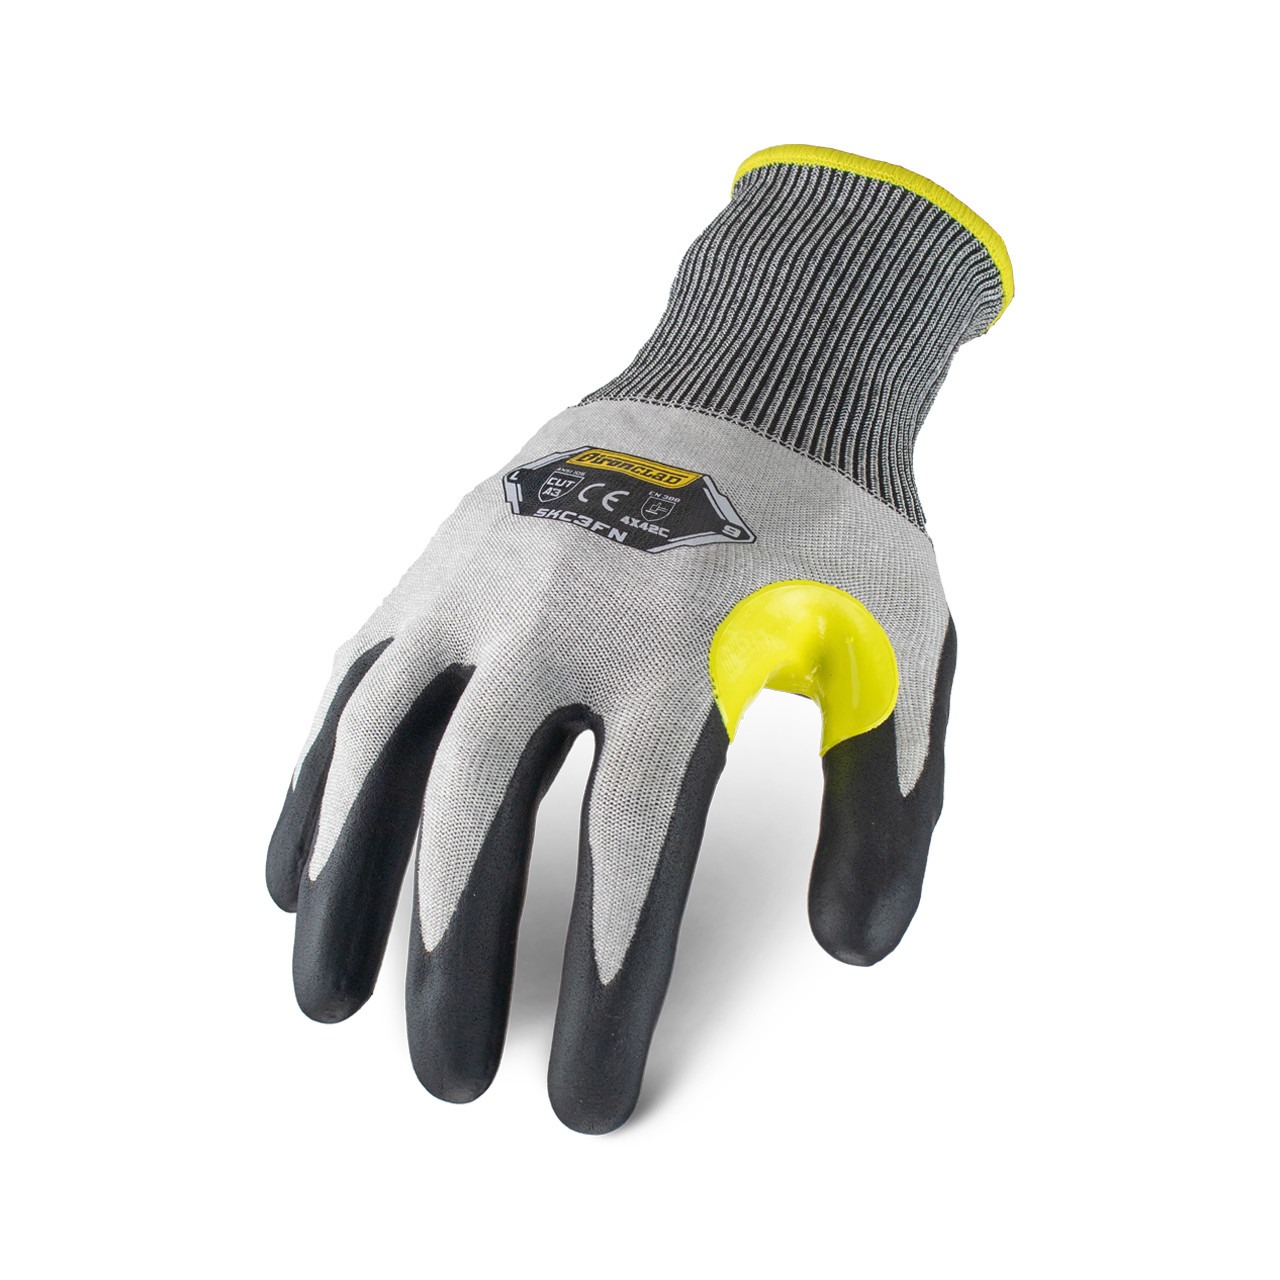 Ironclad XL Level A3 Cut Glove, 18 Gauge HPPE/Steel Knit with Foam Nitrile  Command Touchscreen Palm Coating and Reinforced Thumb Saddle - Extra Large  - SKC3FN-05-XL - A. Louis Supply